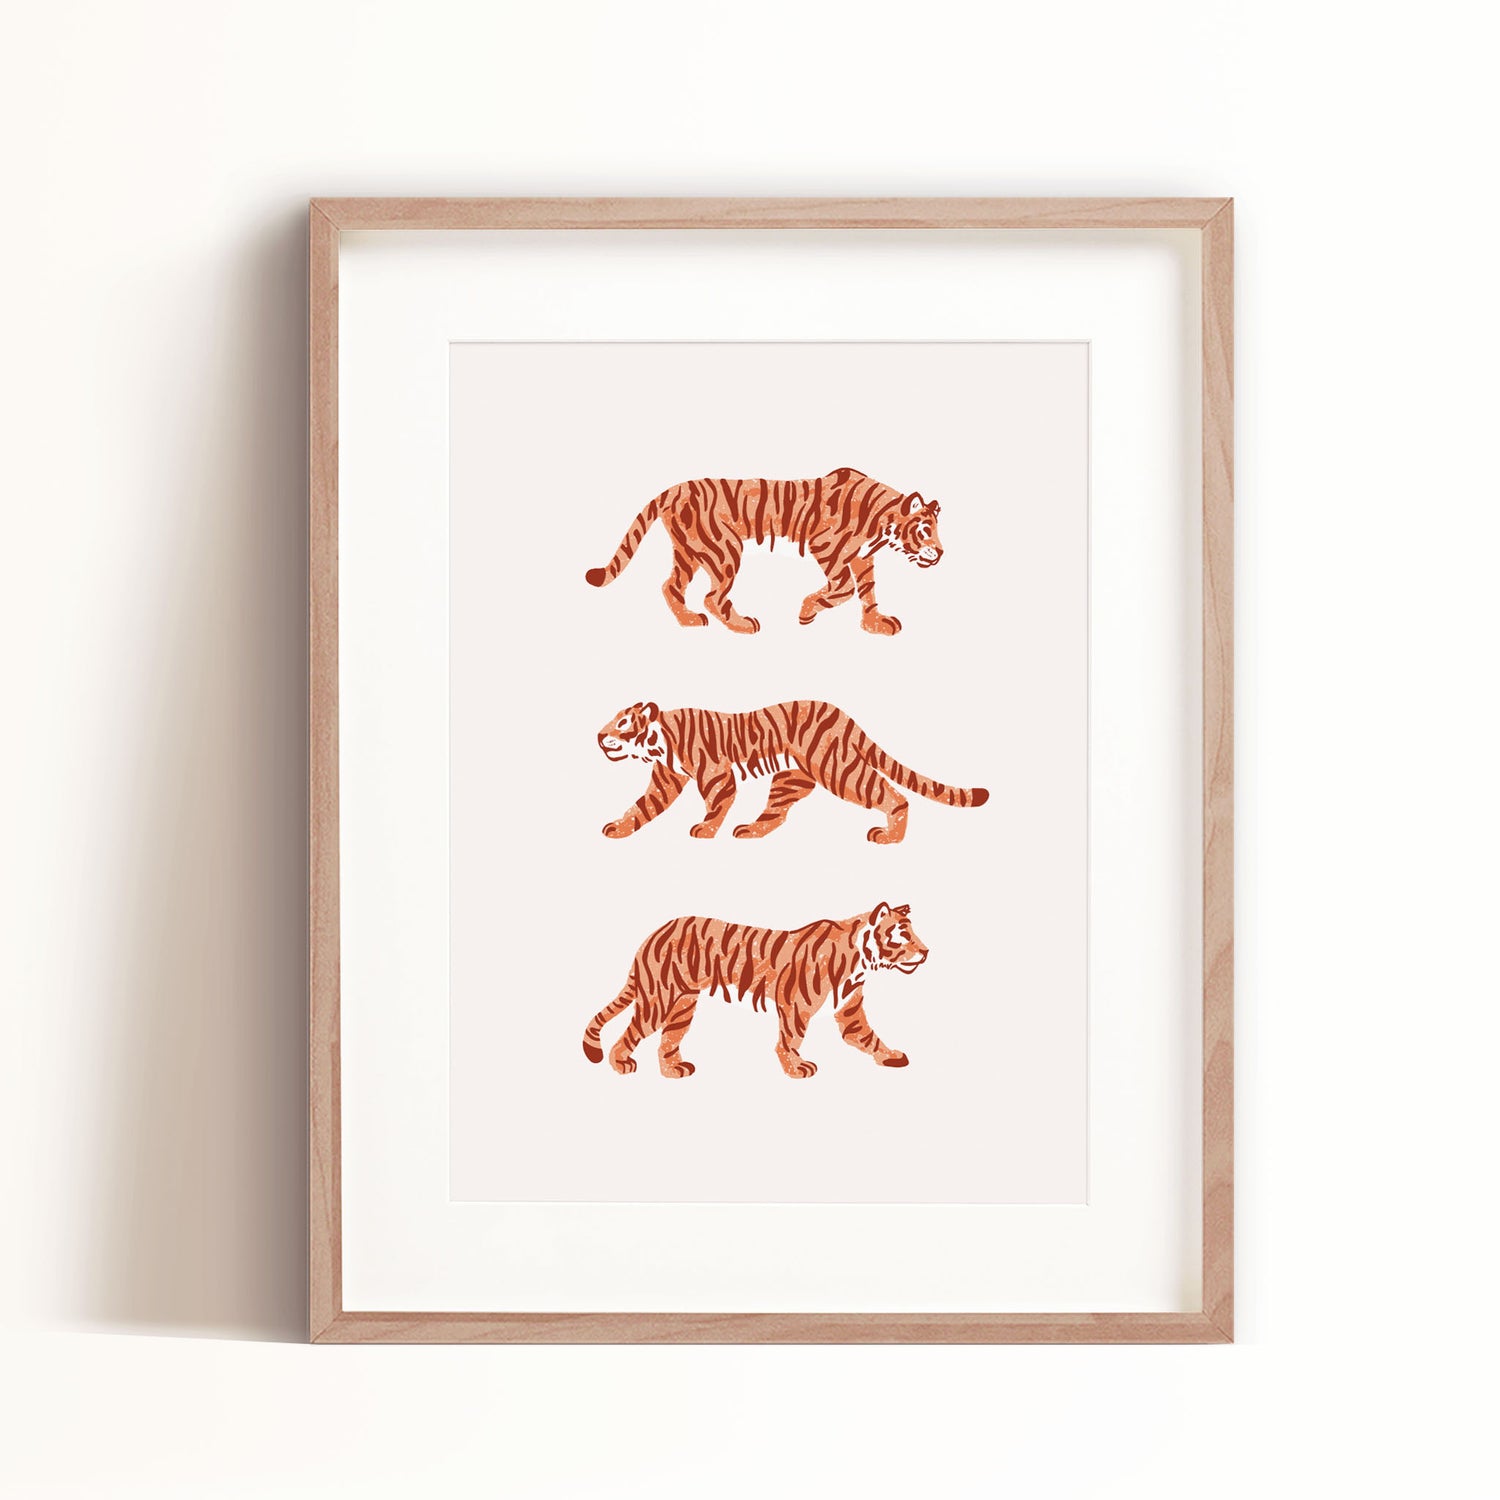 Three Tigers art print in orange is great for kids spaces